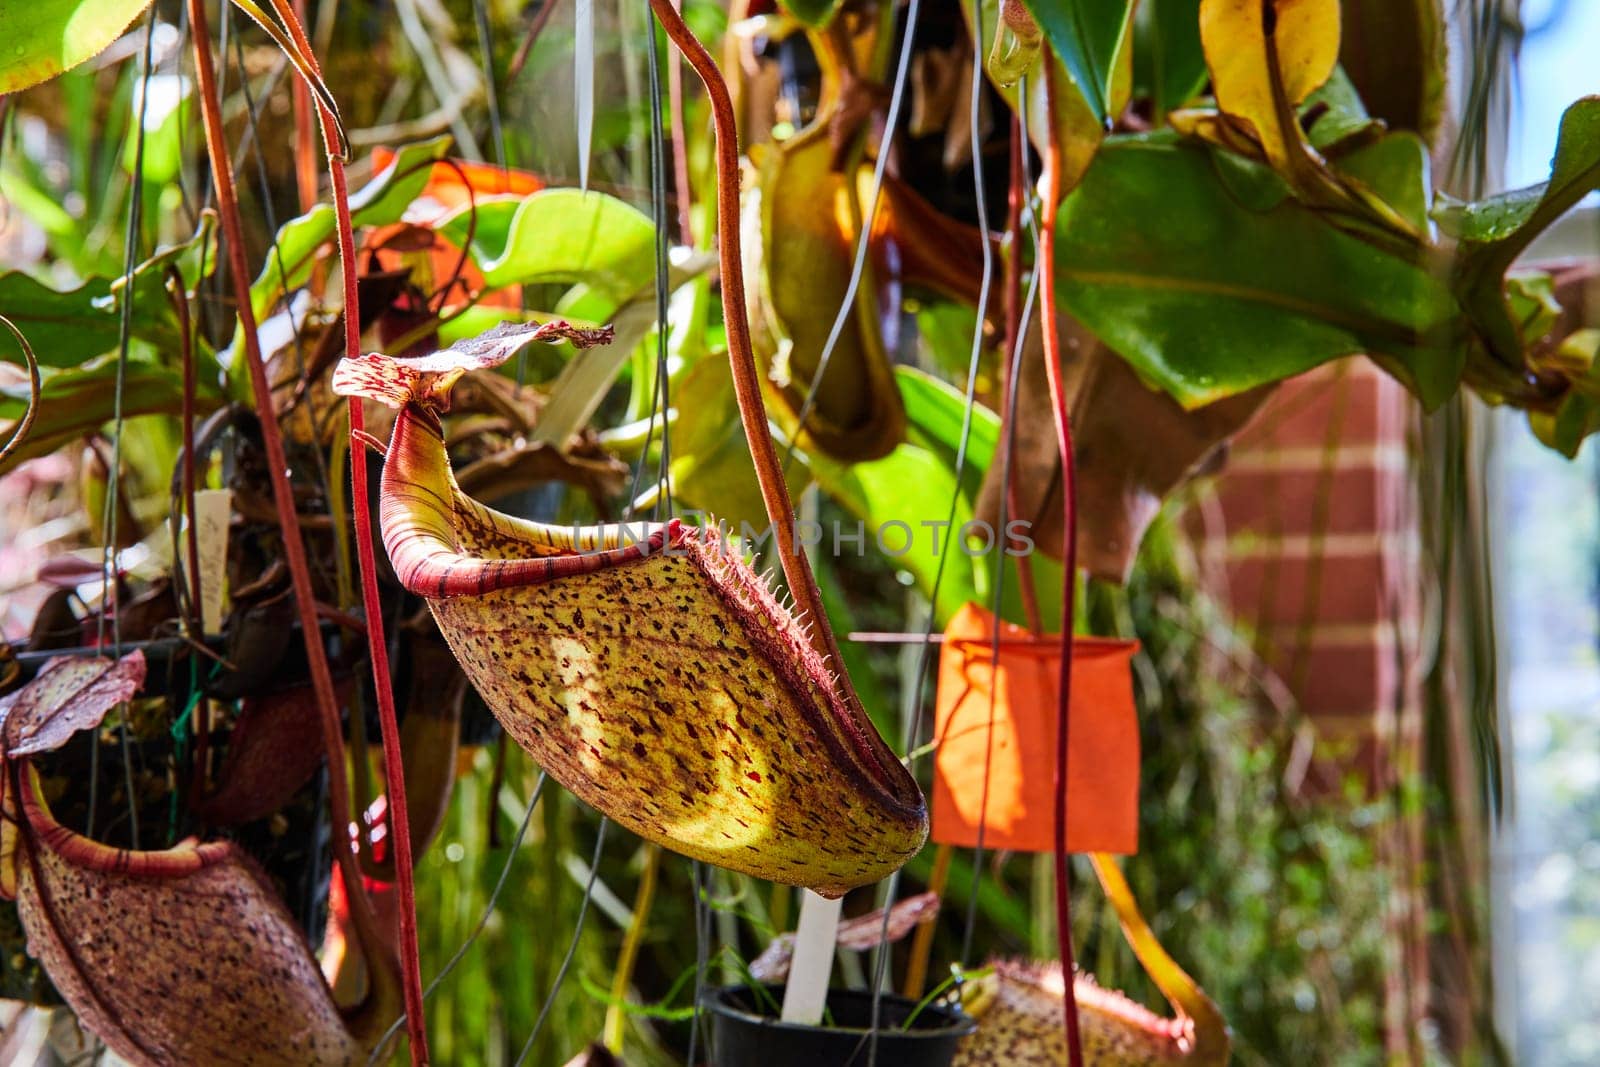 Vibrant Nepenthes Display in Greenhouse Setting by njproductions